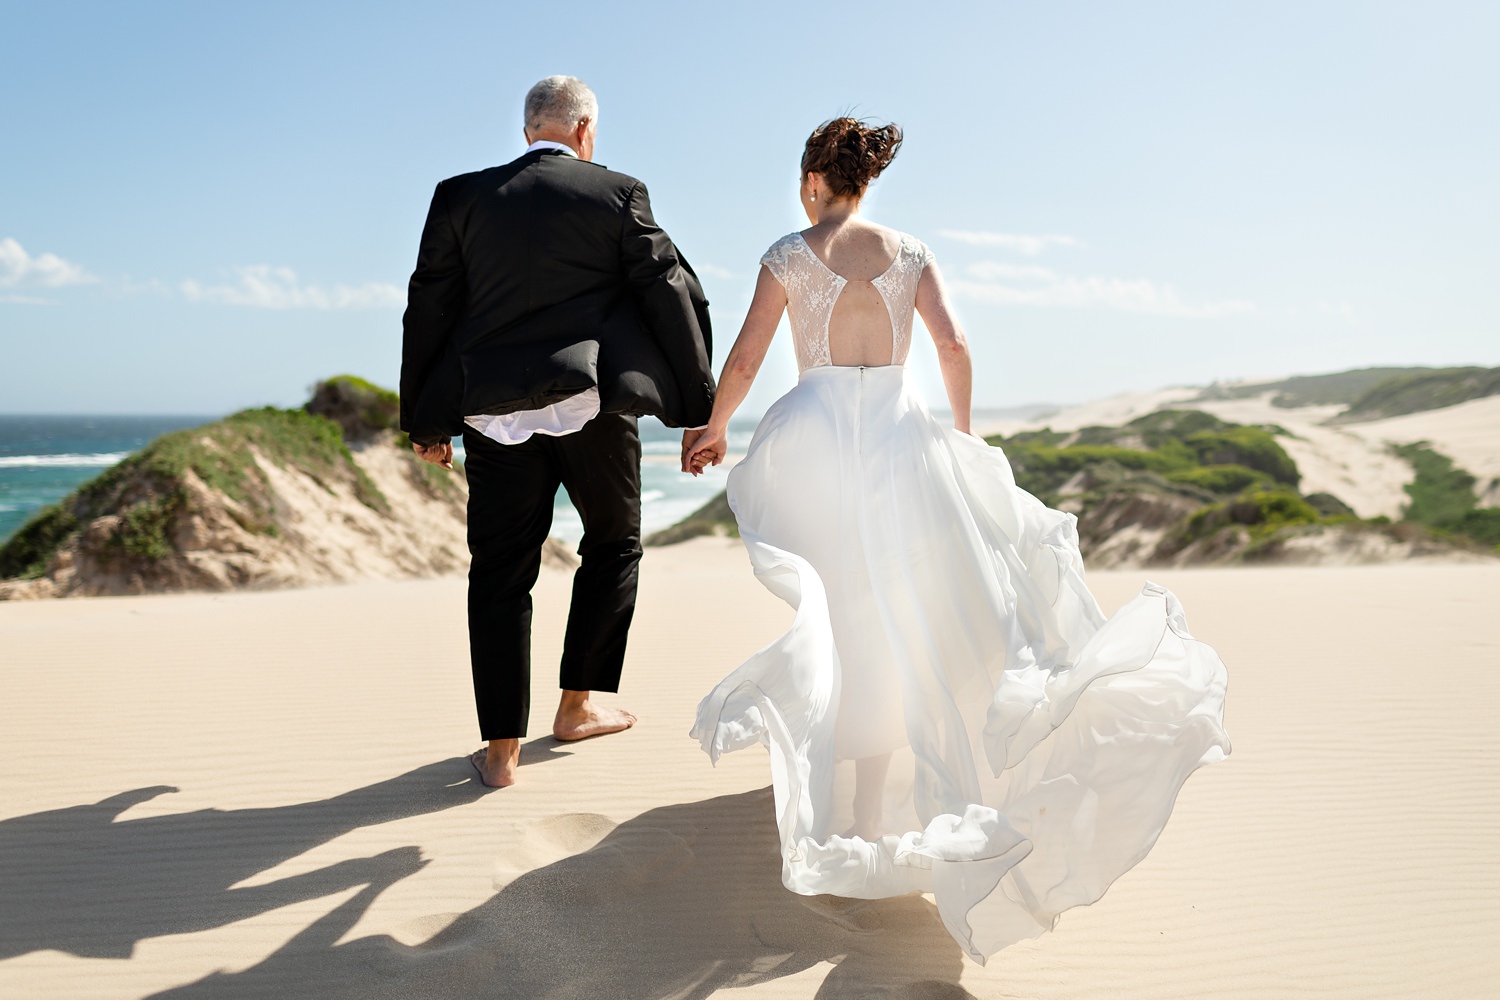 Beach wedding photos. The bride and groom walk over a dune into the wind, with the brides dress blowing out behind her.